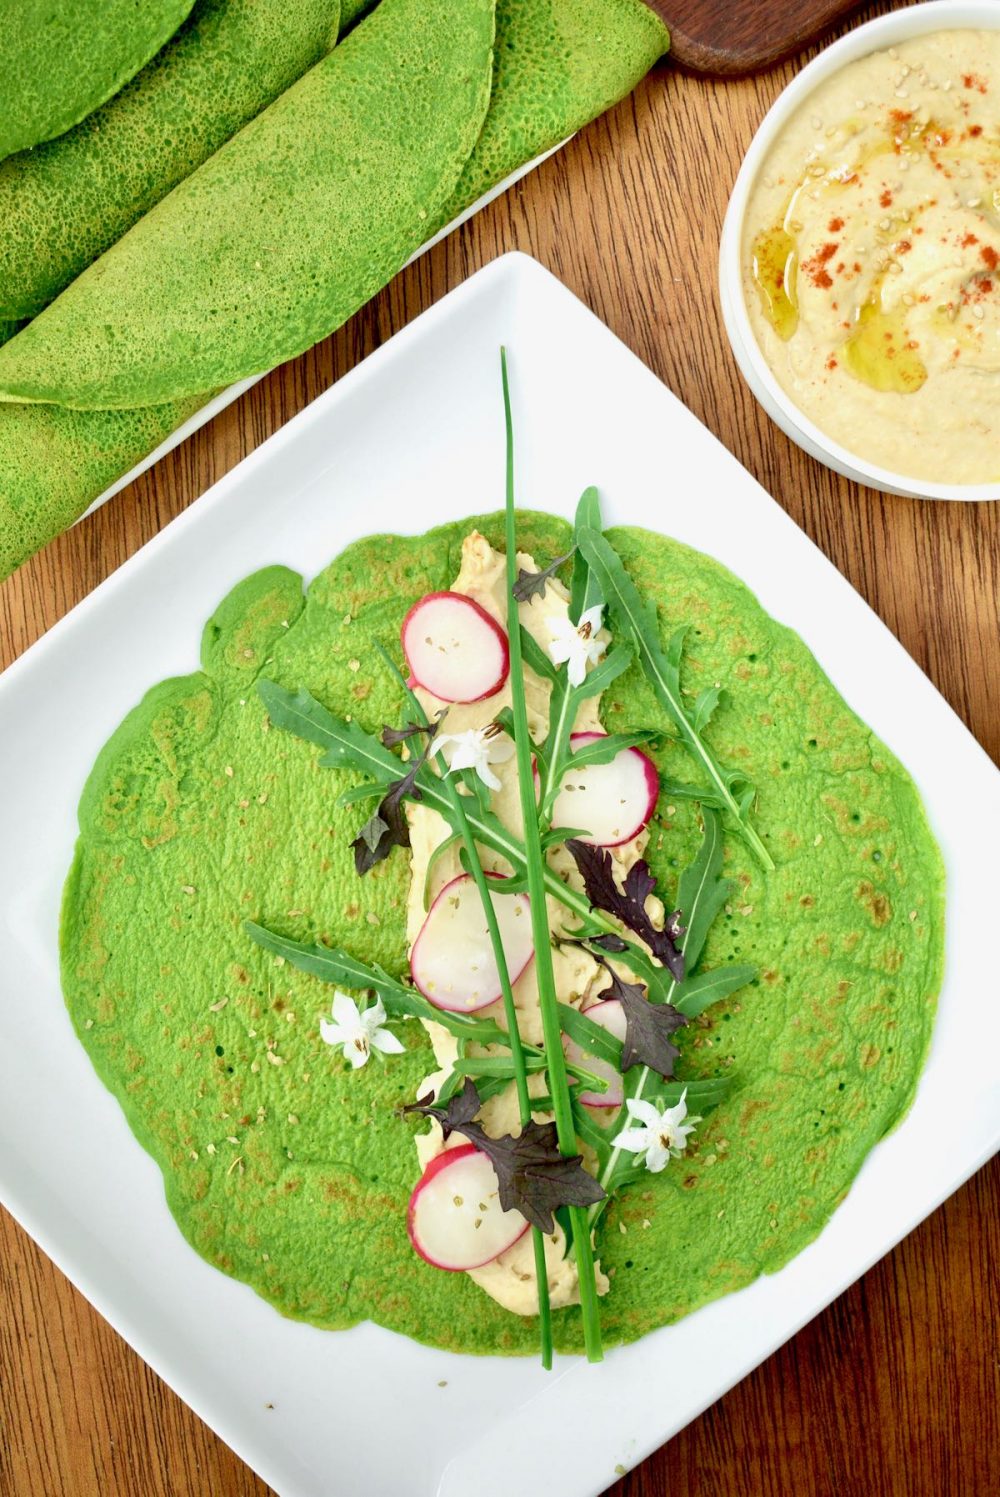 The finished spinach pancake is filled with hummus, radishes, rocket and herbs. 